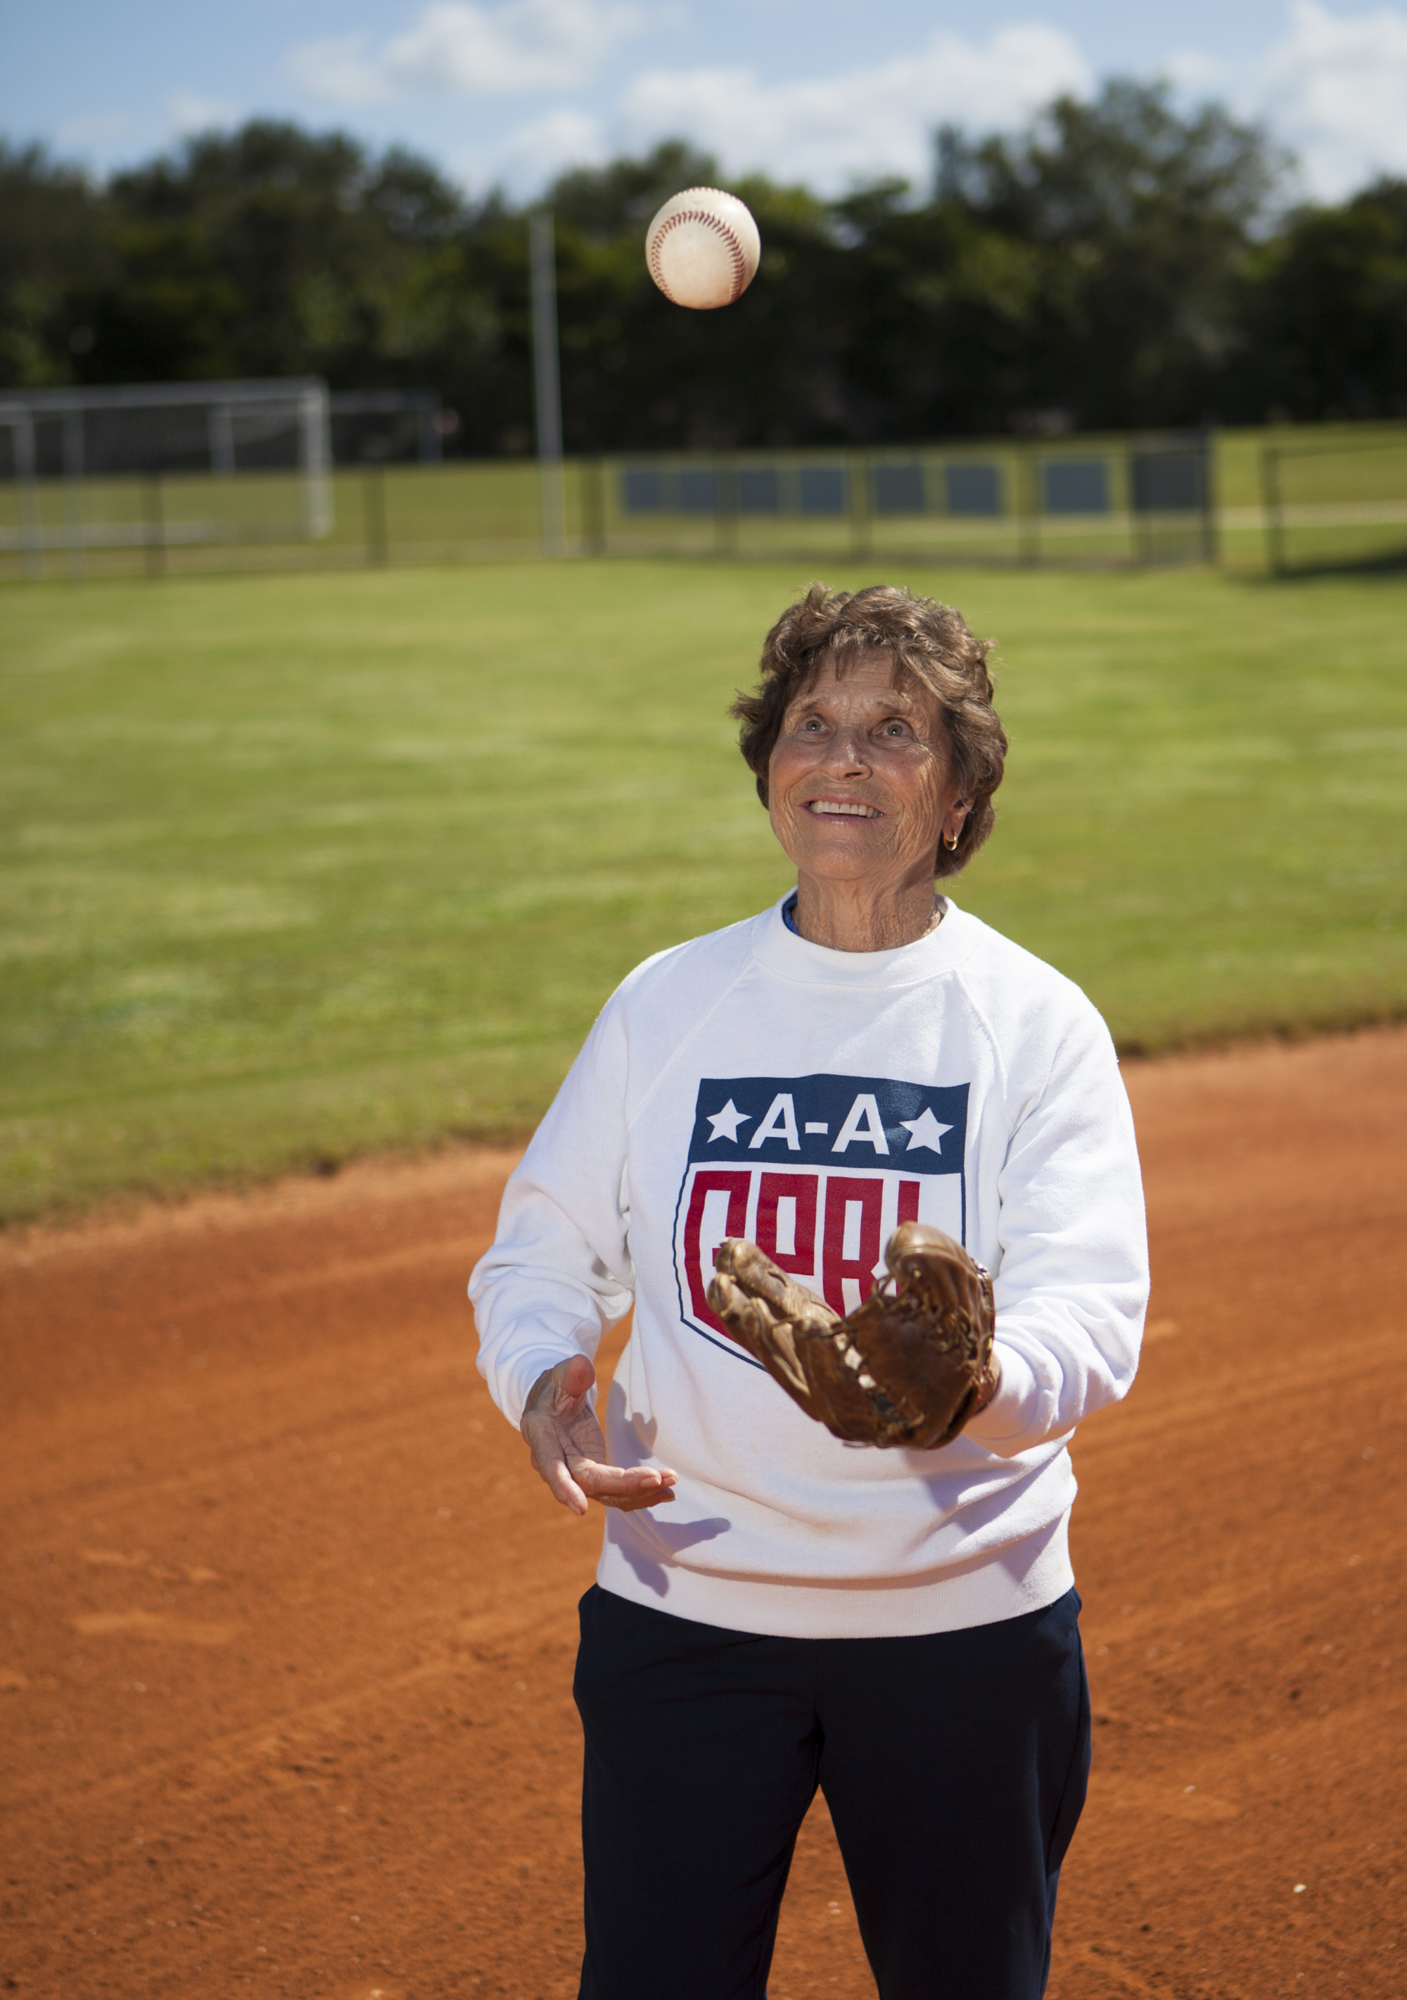 Sue Zipay played in the All-American Girls Professional Baseball League in the 1950s. Now, she wants to bring a women’s sports museum to Sarasota.